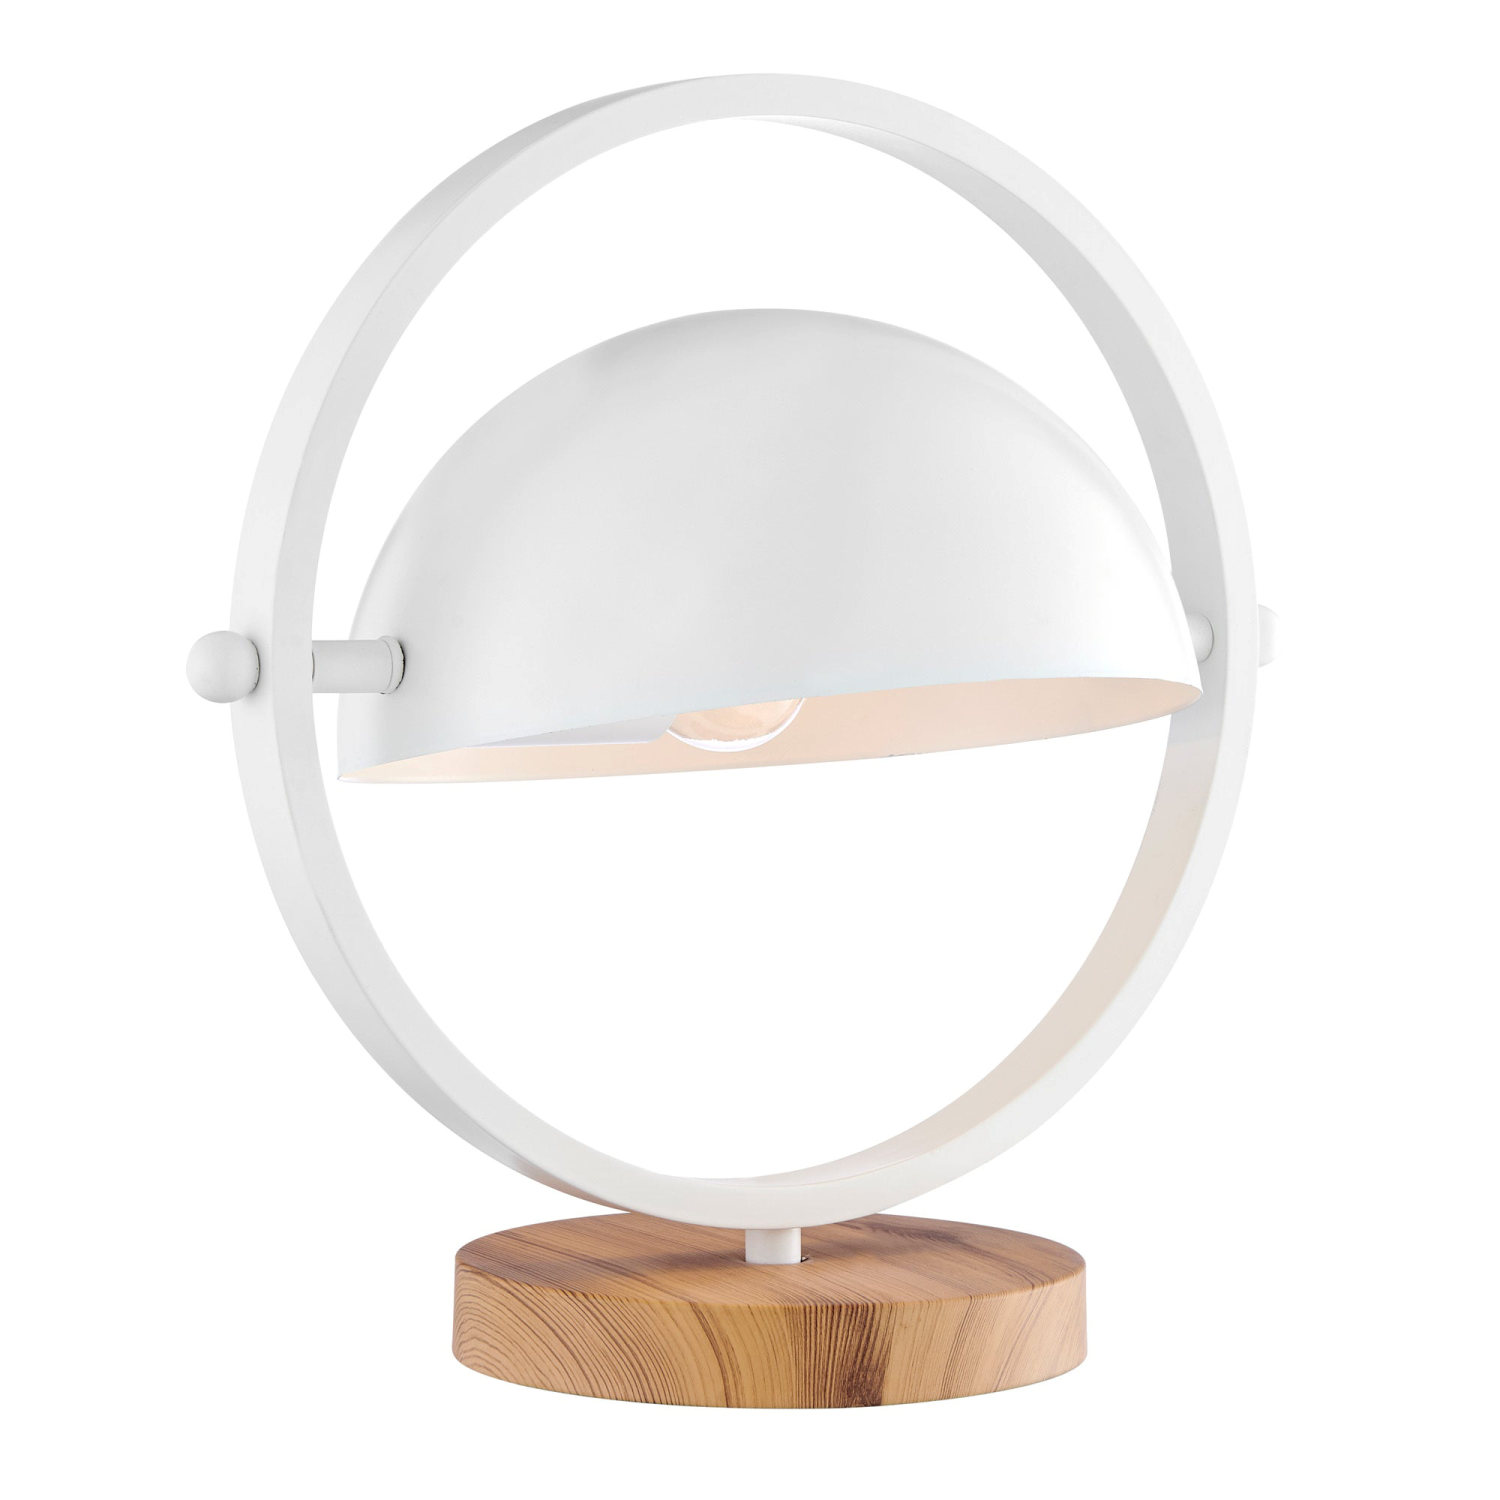 Wanda Desk Lamp Color Option White with Wooden Base